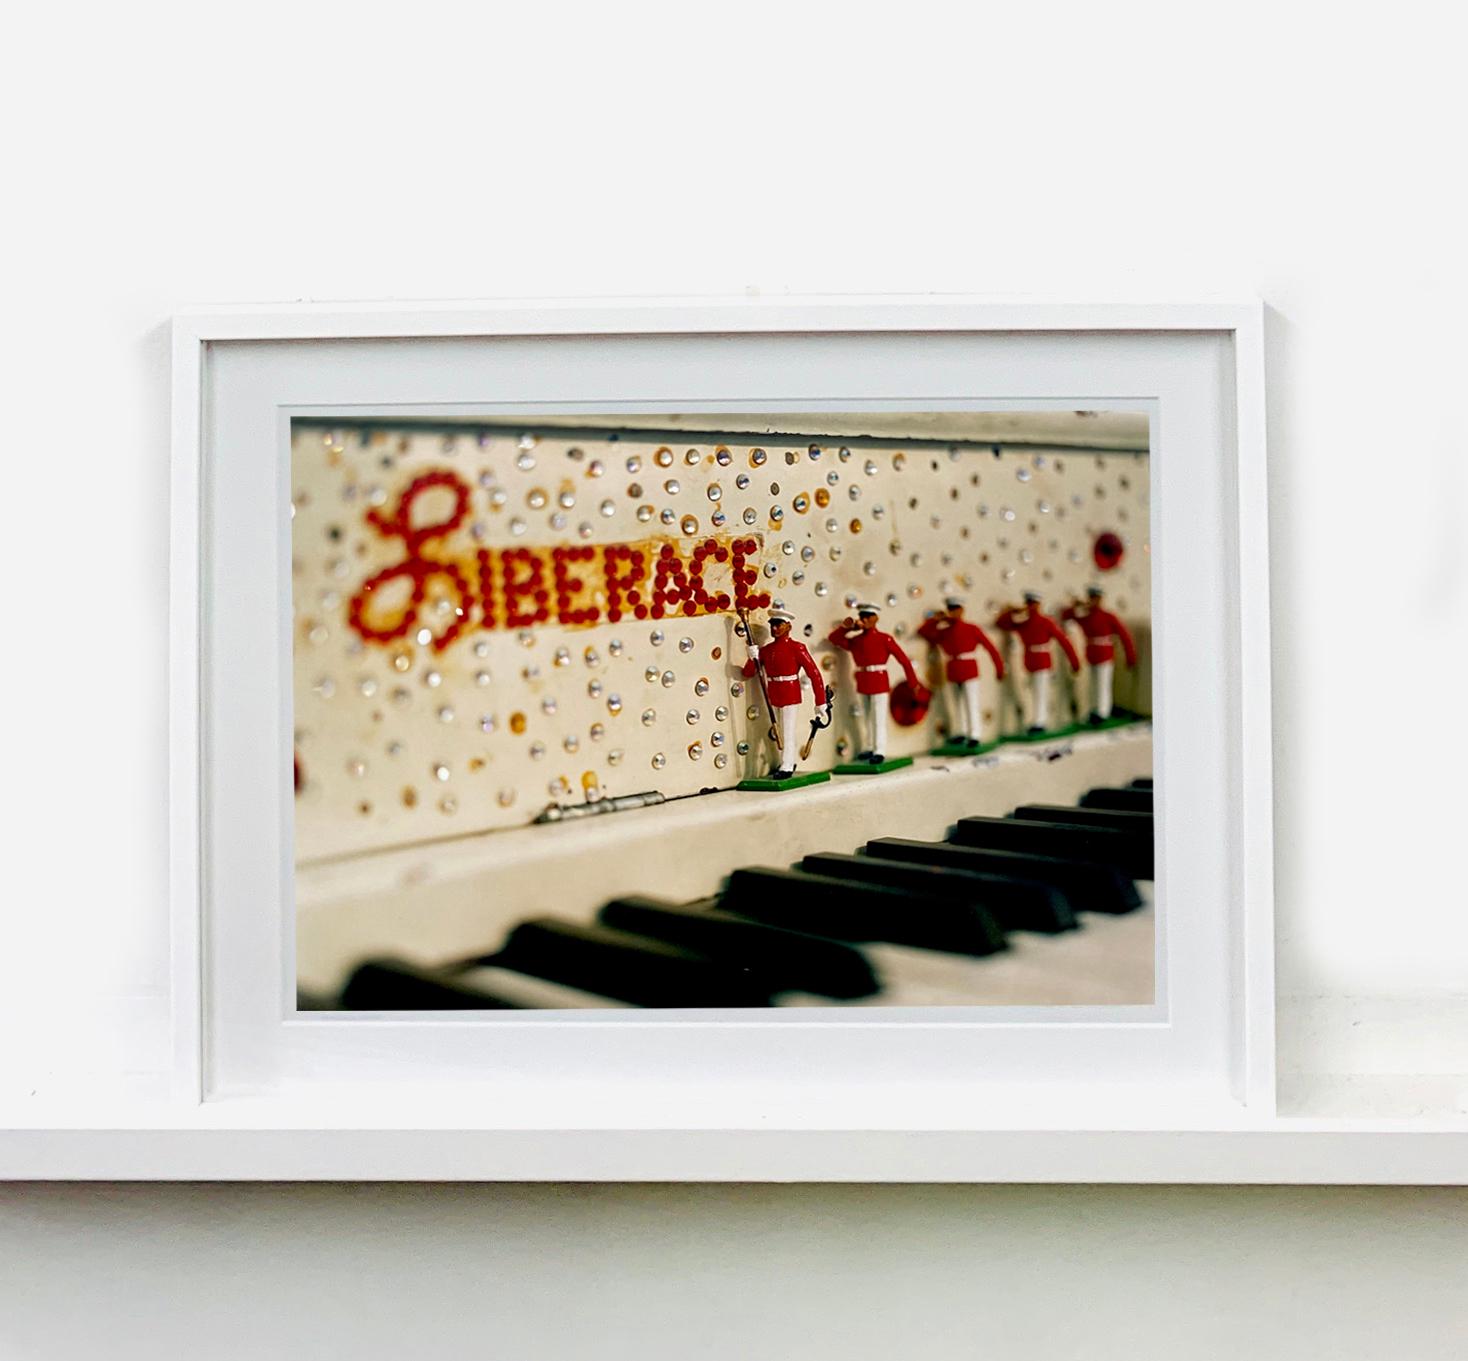 'Liberace's Piano' part of Richard Heeps 'Dream in Colour' Series, it has an archetypal Las Vegas feel, Richard captured one of Liberace's piano's in a private home. This shot has a great fun, kitsch vibe.

This artwork is a limited edition of 25